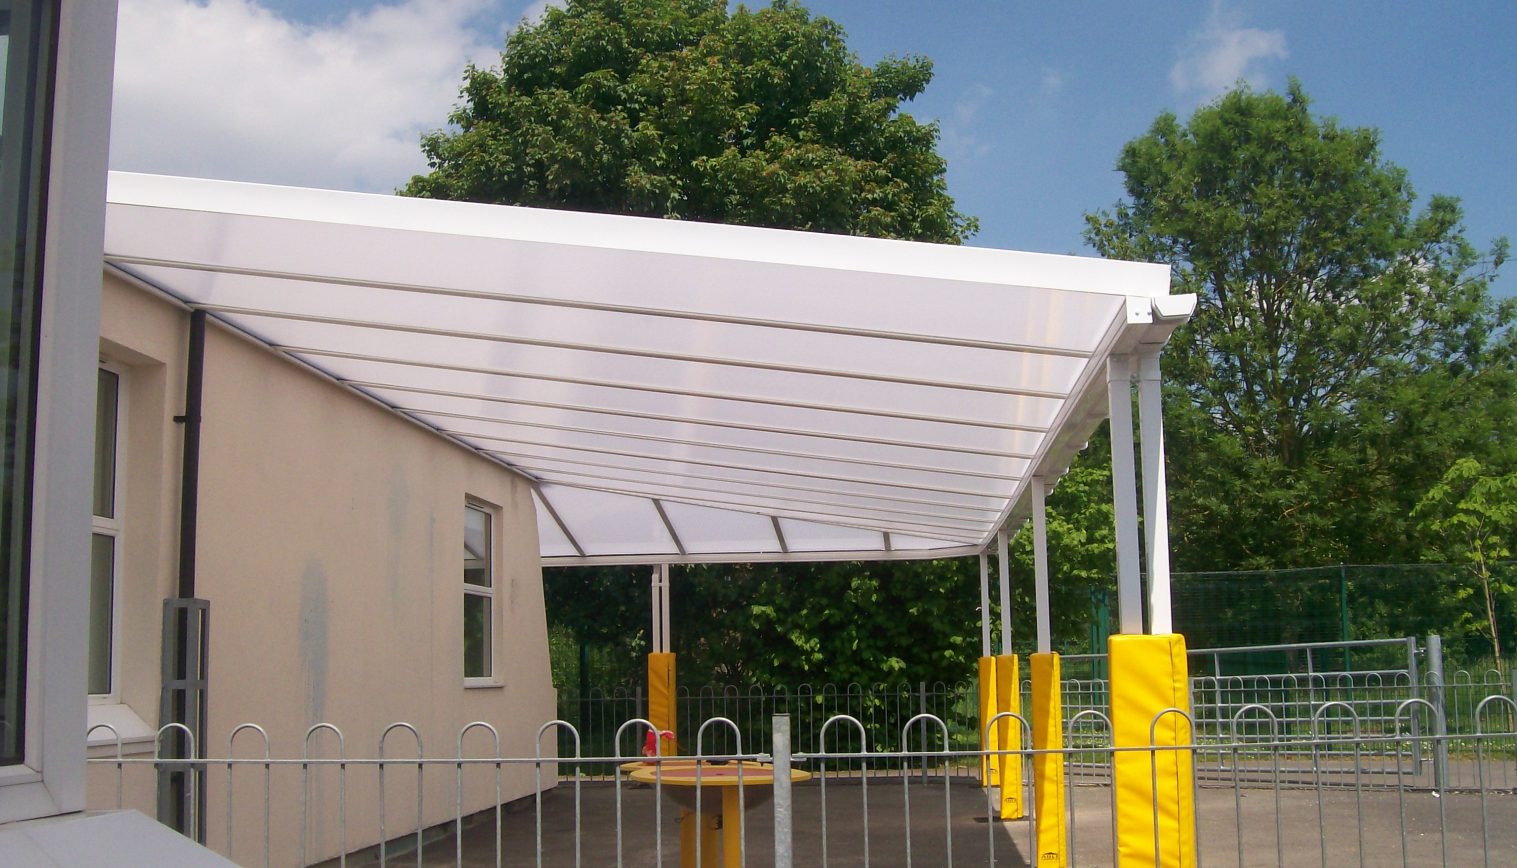 The Chalet School – Wall Mounted Canopy – 2nd Installation